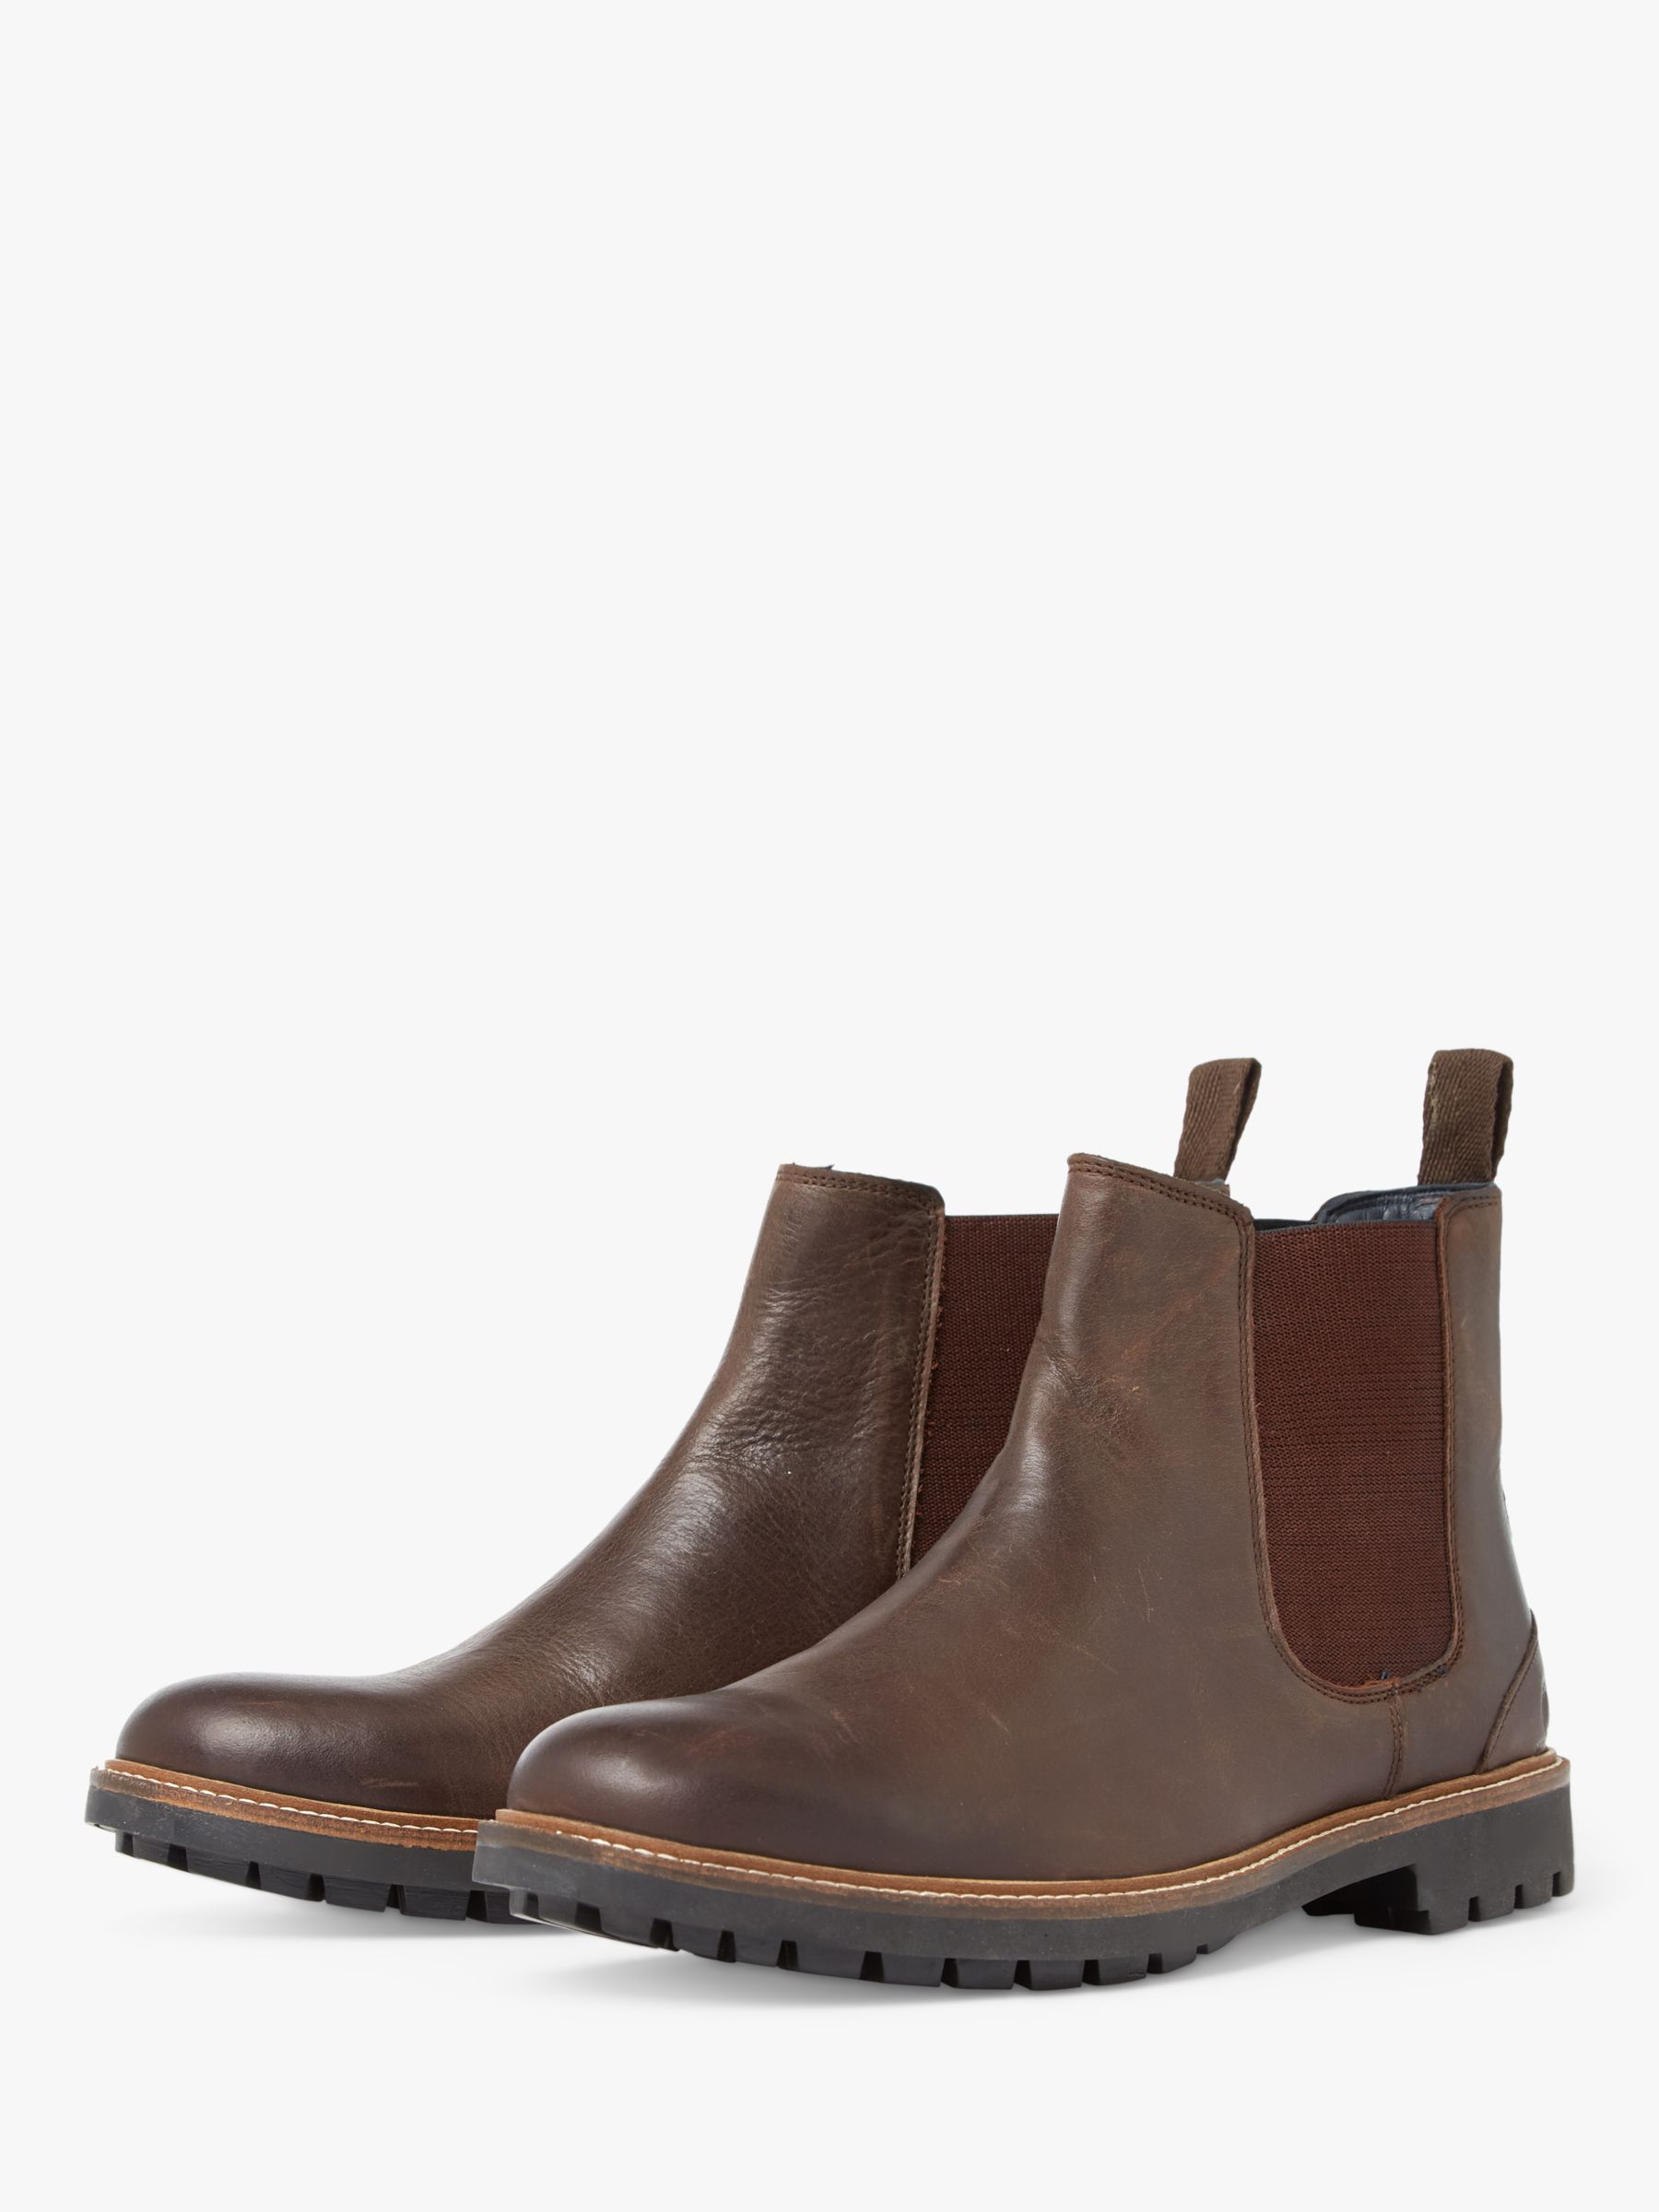 Chatham Chirk Leather Chelsea Boots, Brown, 6